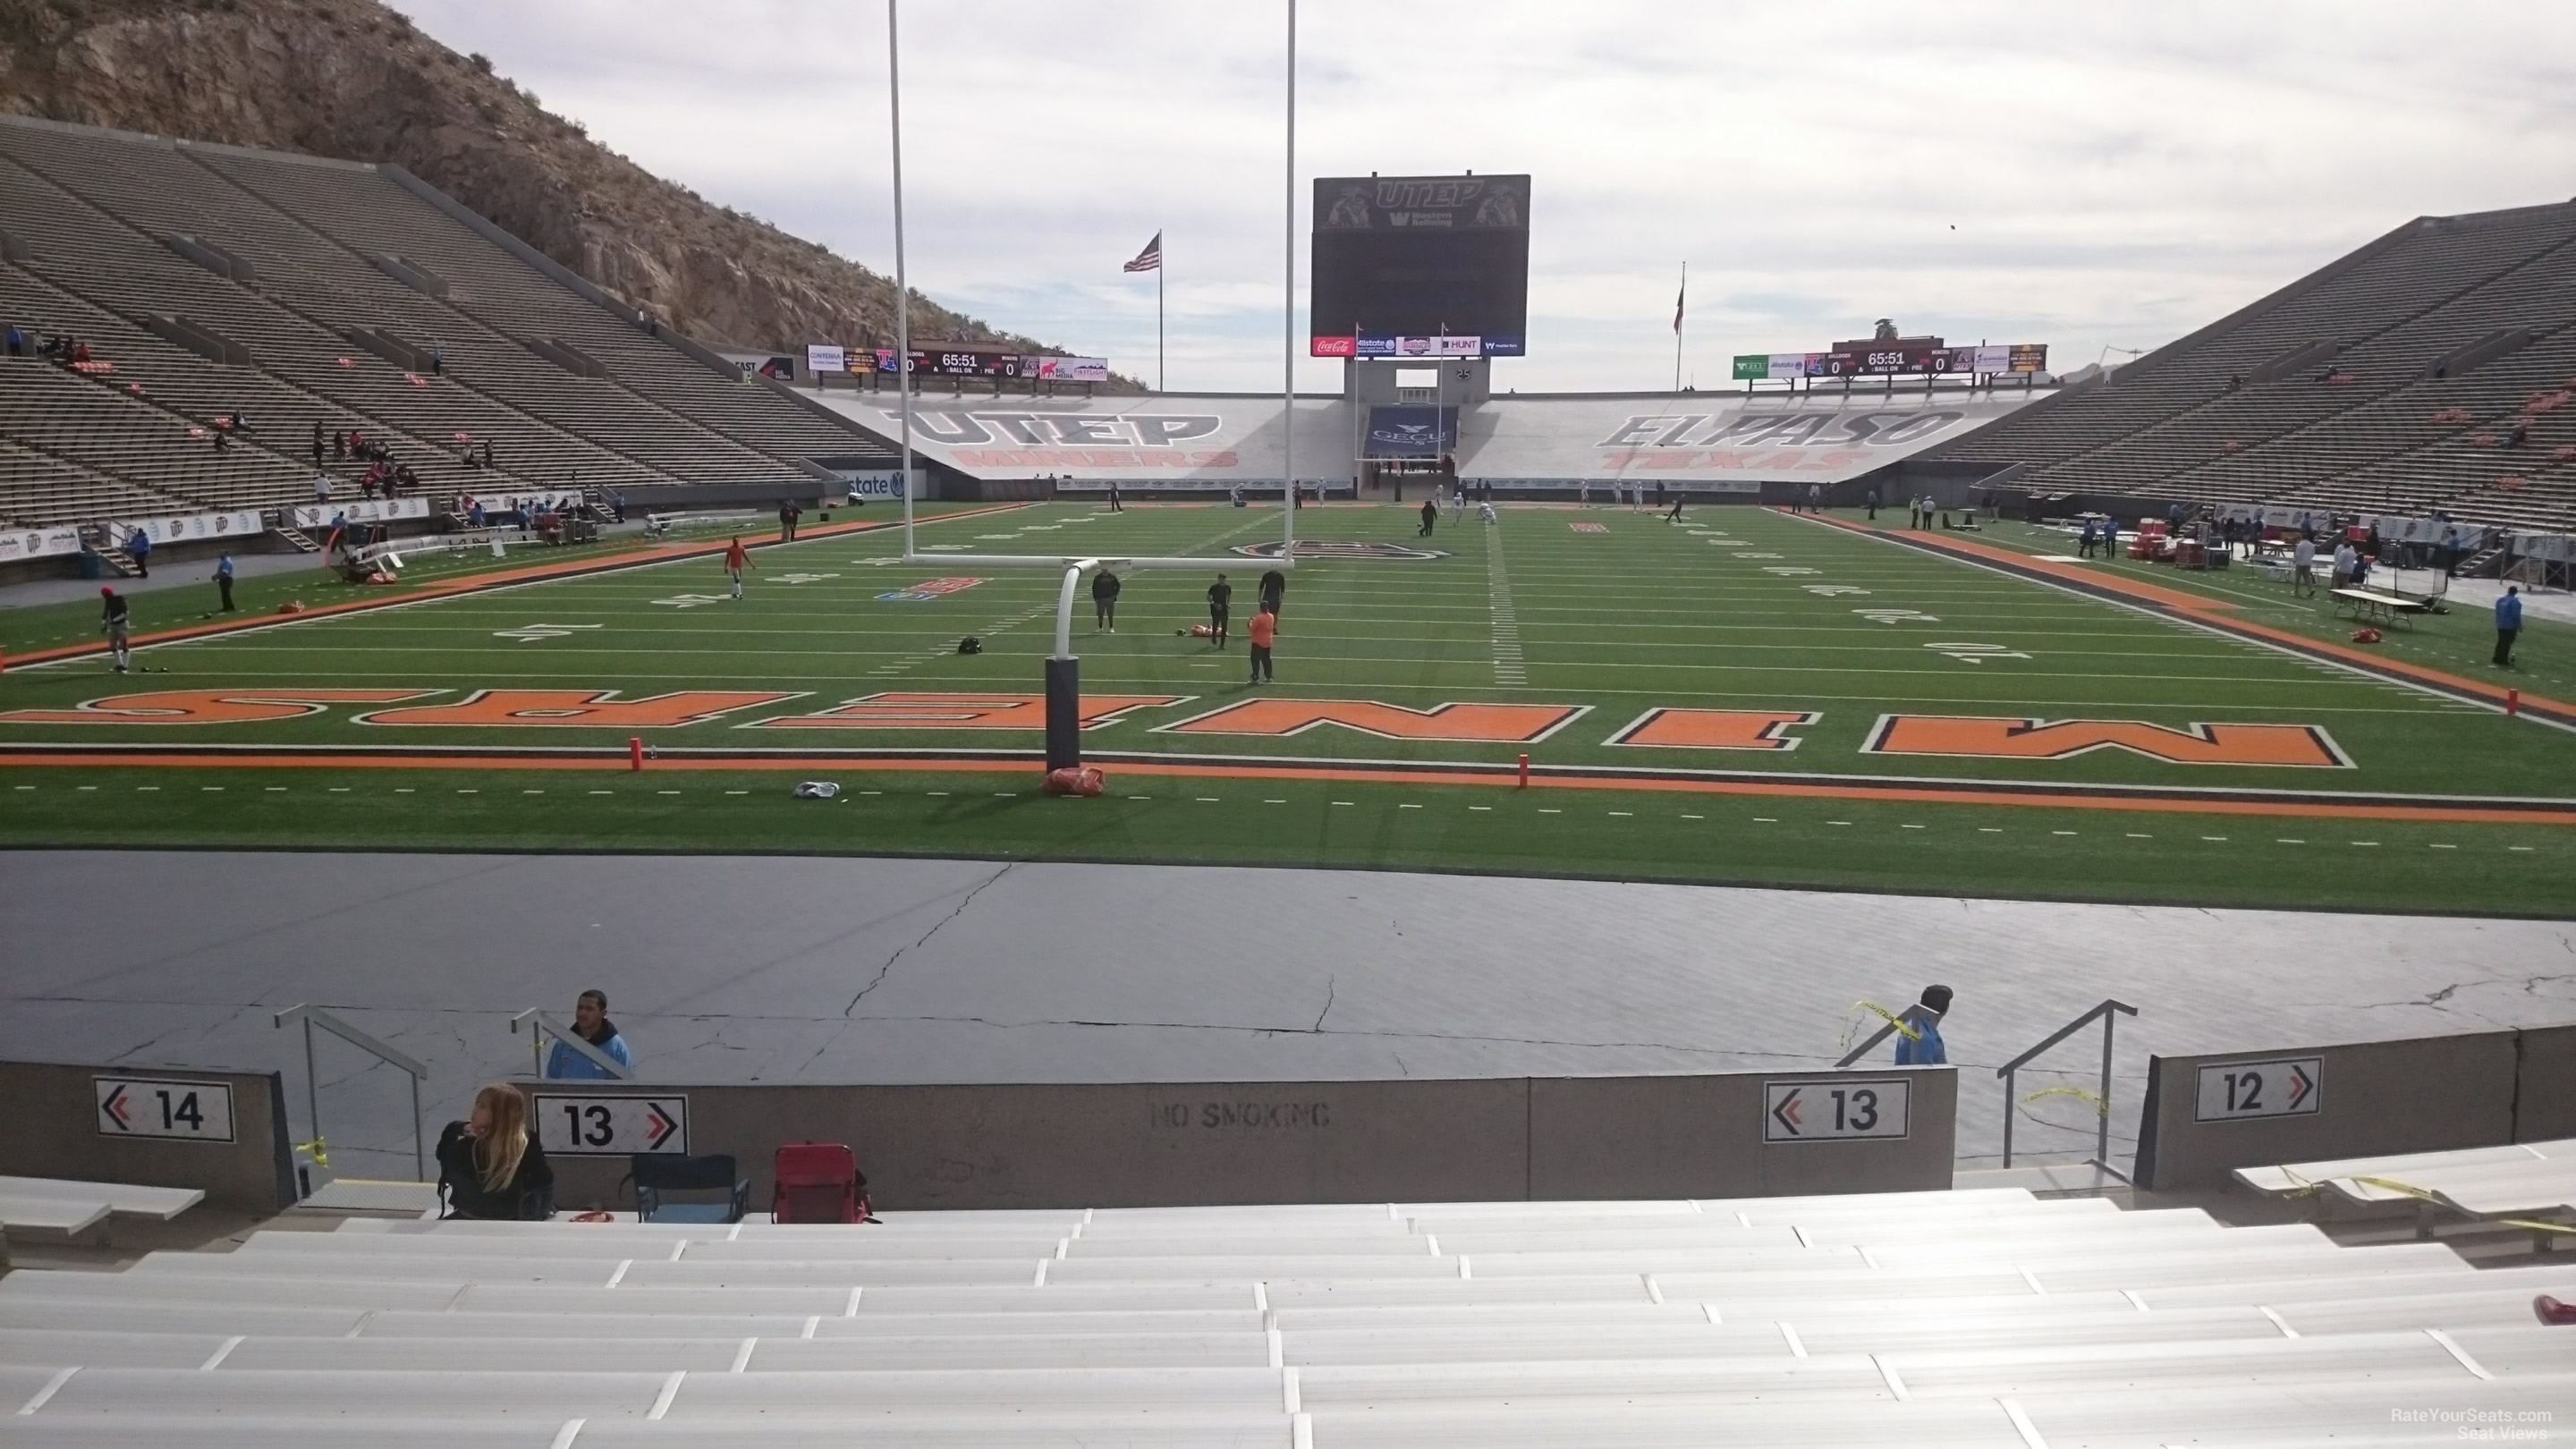 section 13, row 15 seat view  for football - sun bowl